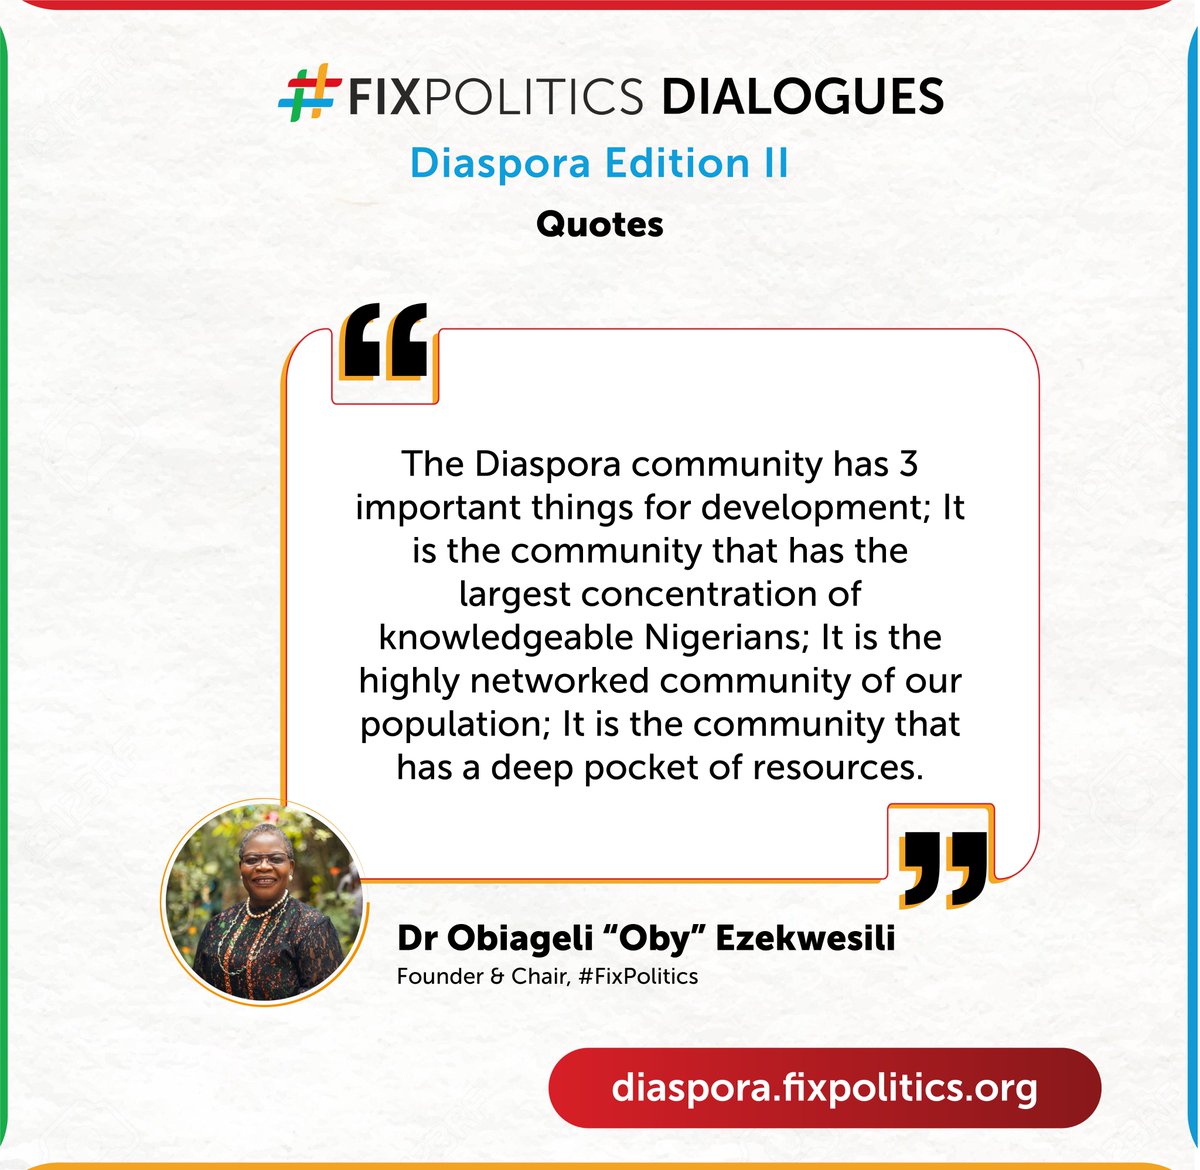 'The diaspora community has 3 important things for development; it is the community that has the largest concentration of knowledgeable Nigerians, network and resources' - @obyezeks at the #FixPolitics Diaspora Dialogue II

Watch this space for the next edition.